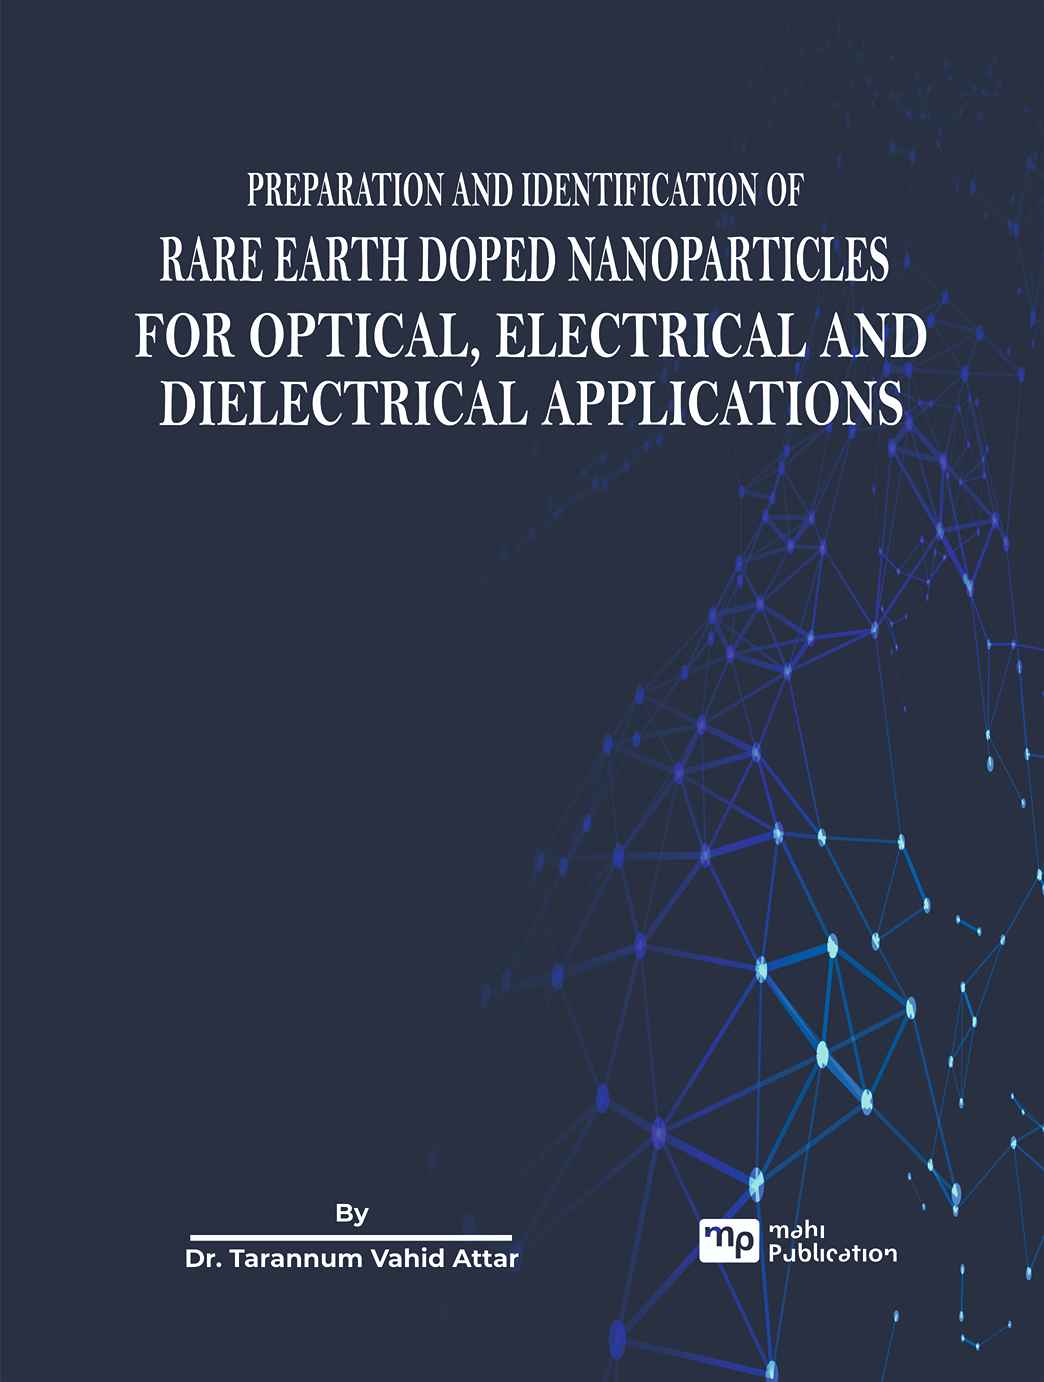 Preparation and identification of rare earth doped nanoparticles for optical, electrical and dielectrical applications